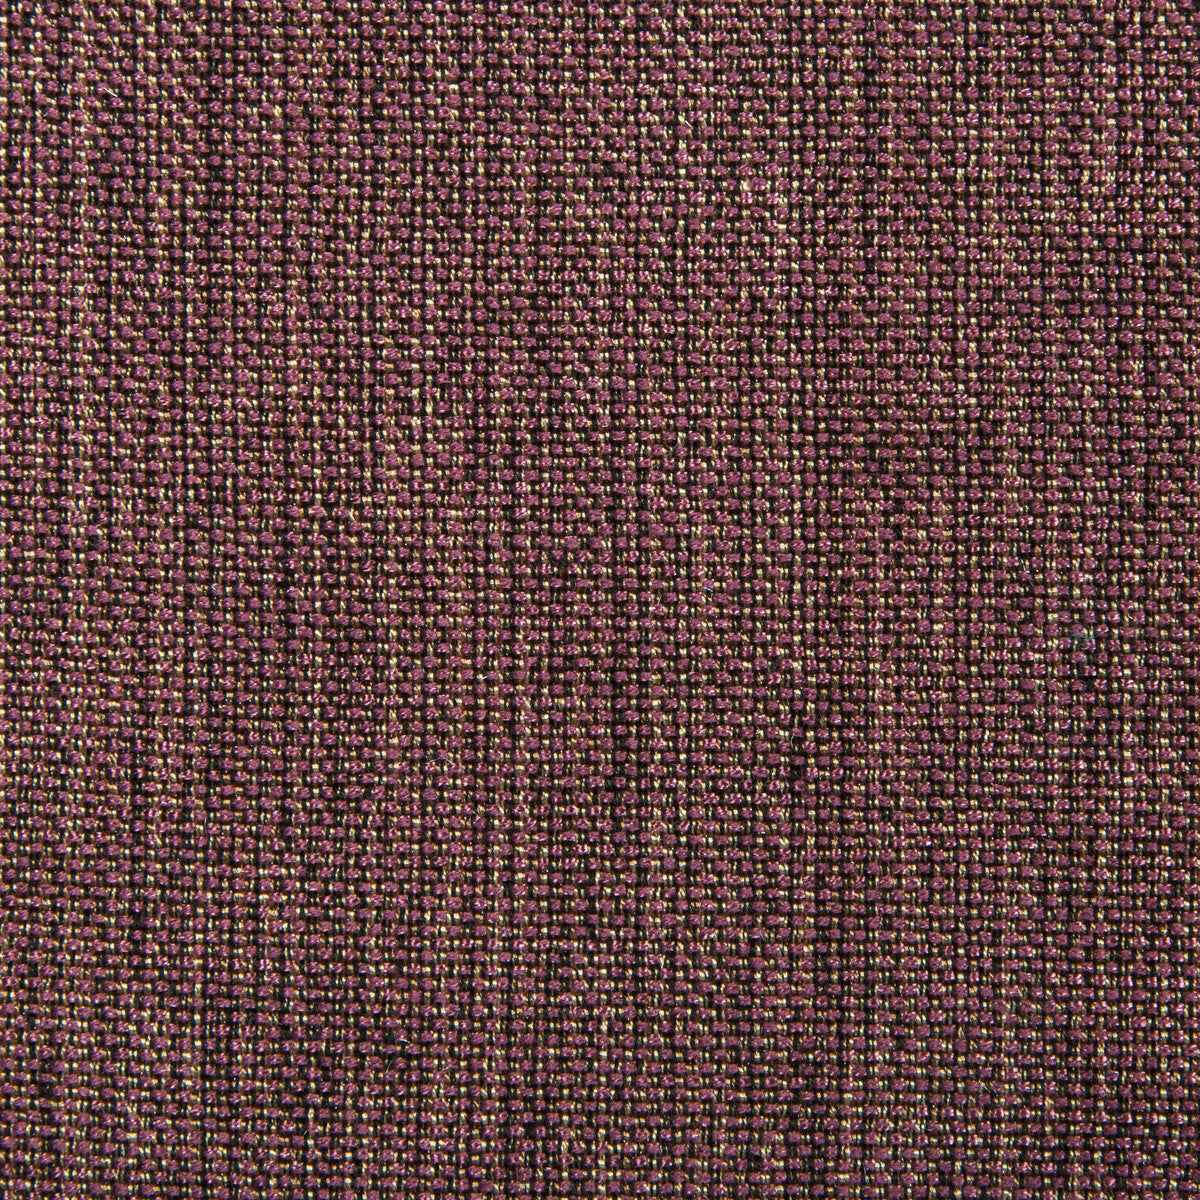 Kravet Contract fabric in 4458-810 color - pattern 4458.810.0 - by Kravet Contract